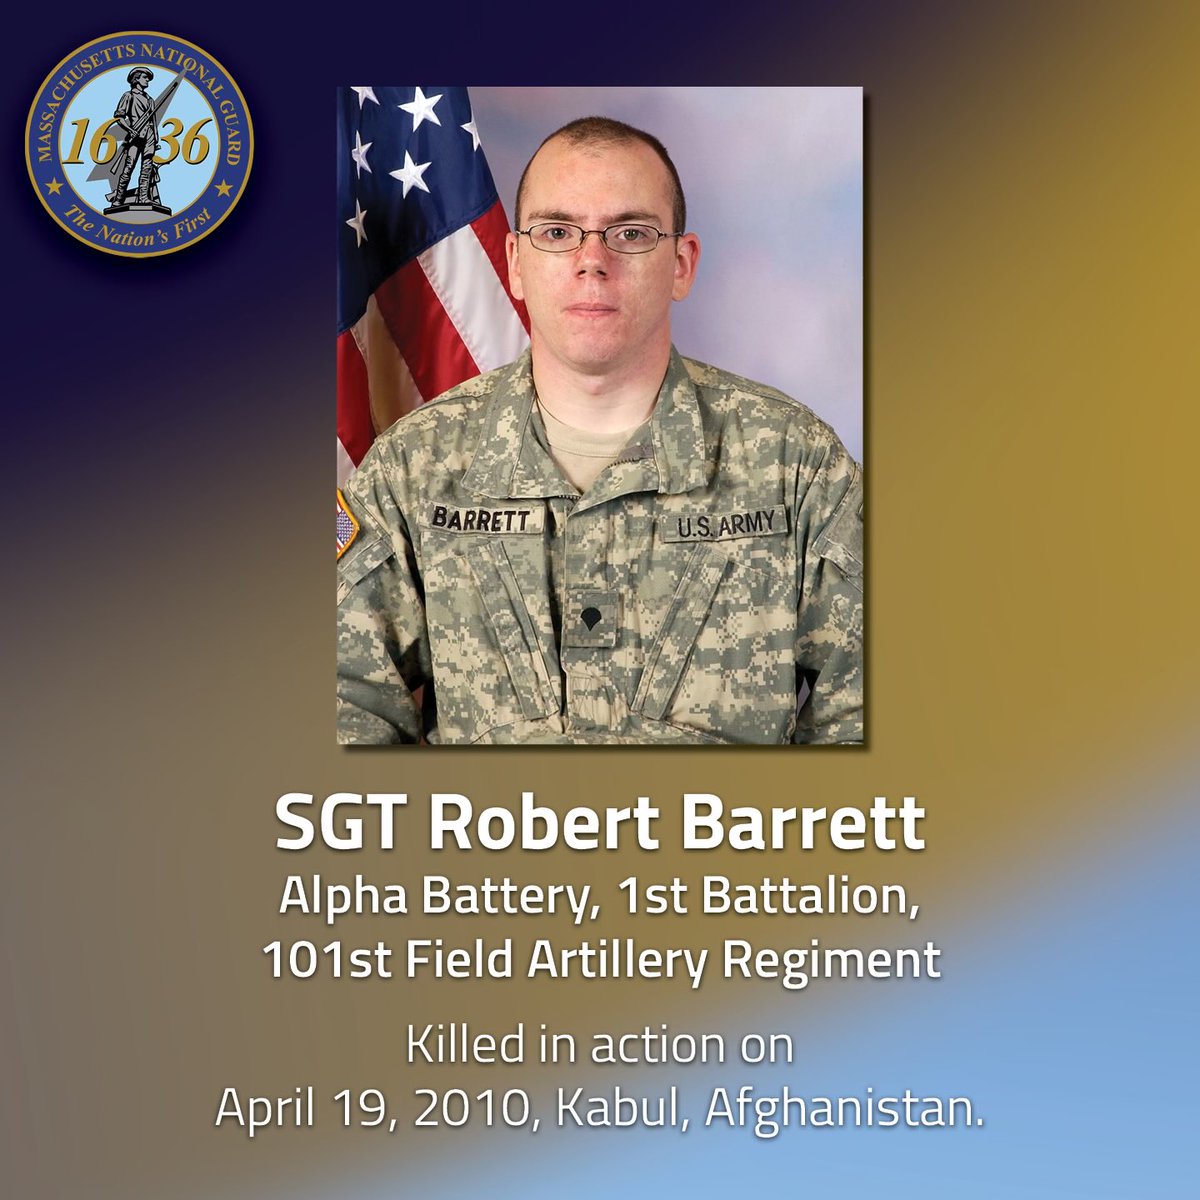 The Massachusetts National Guard will always remember Sgt. Robert Barrett, Alpha Battery, 1st Battalion, 101st Field Artillery Regiment, who was killed in action by a suicide bomber in Kabul on April 19, 2010. #neverforgotten